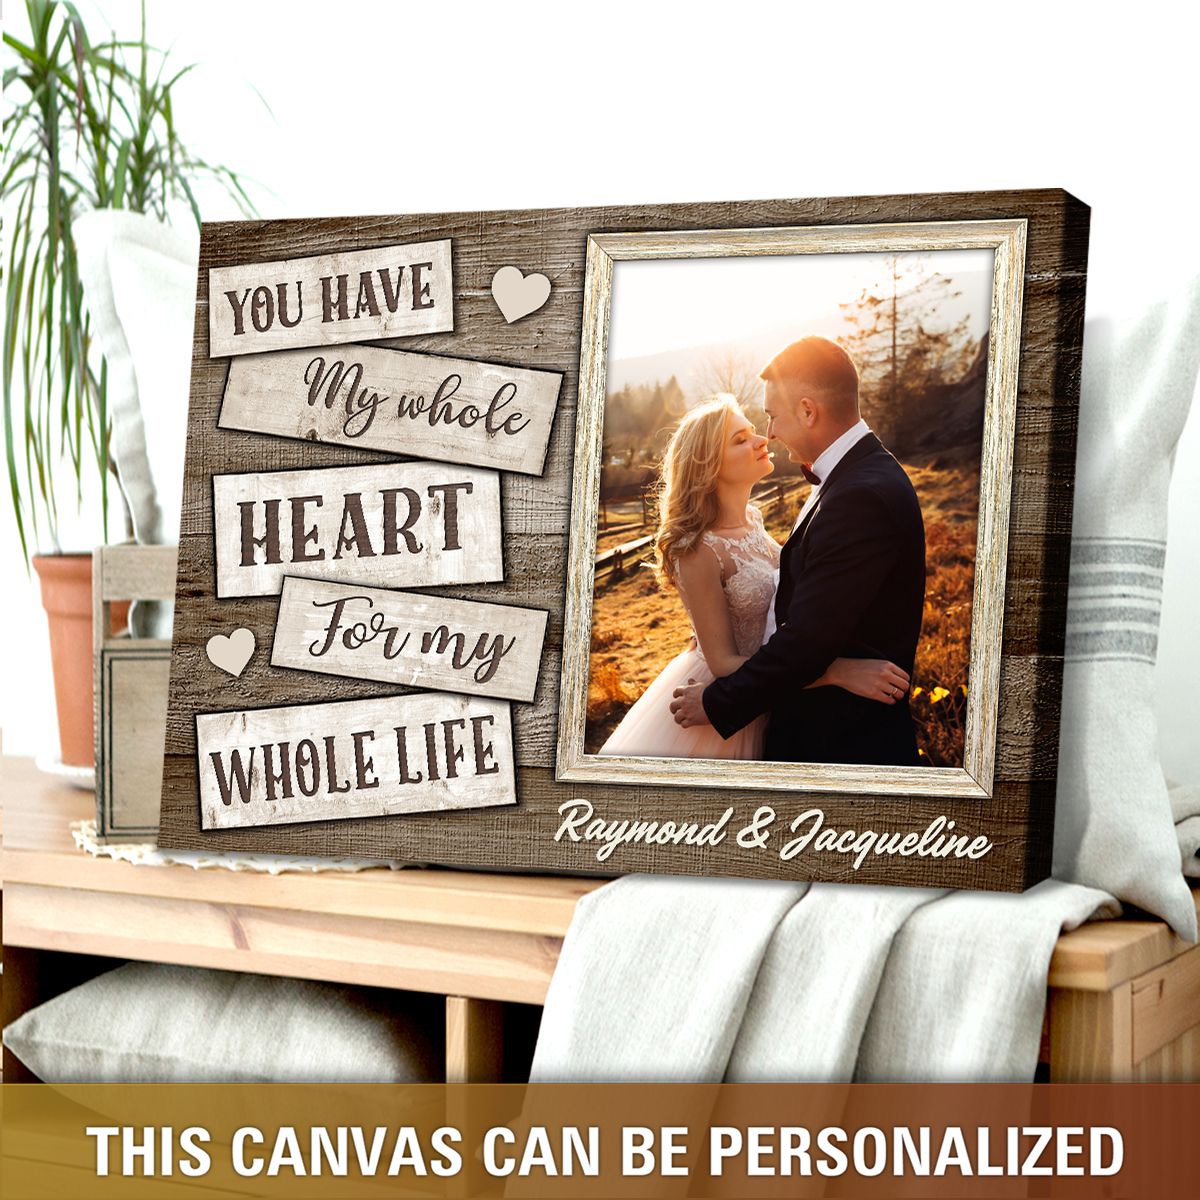 https://images.ohcanvas.com/ohcanvas_com/2022/09/25204244/unique-christmas-gift-for-her-birthday-gift-for-her-ideas-personalized-couple-photo-canvas-wall-decor02.jpg